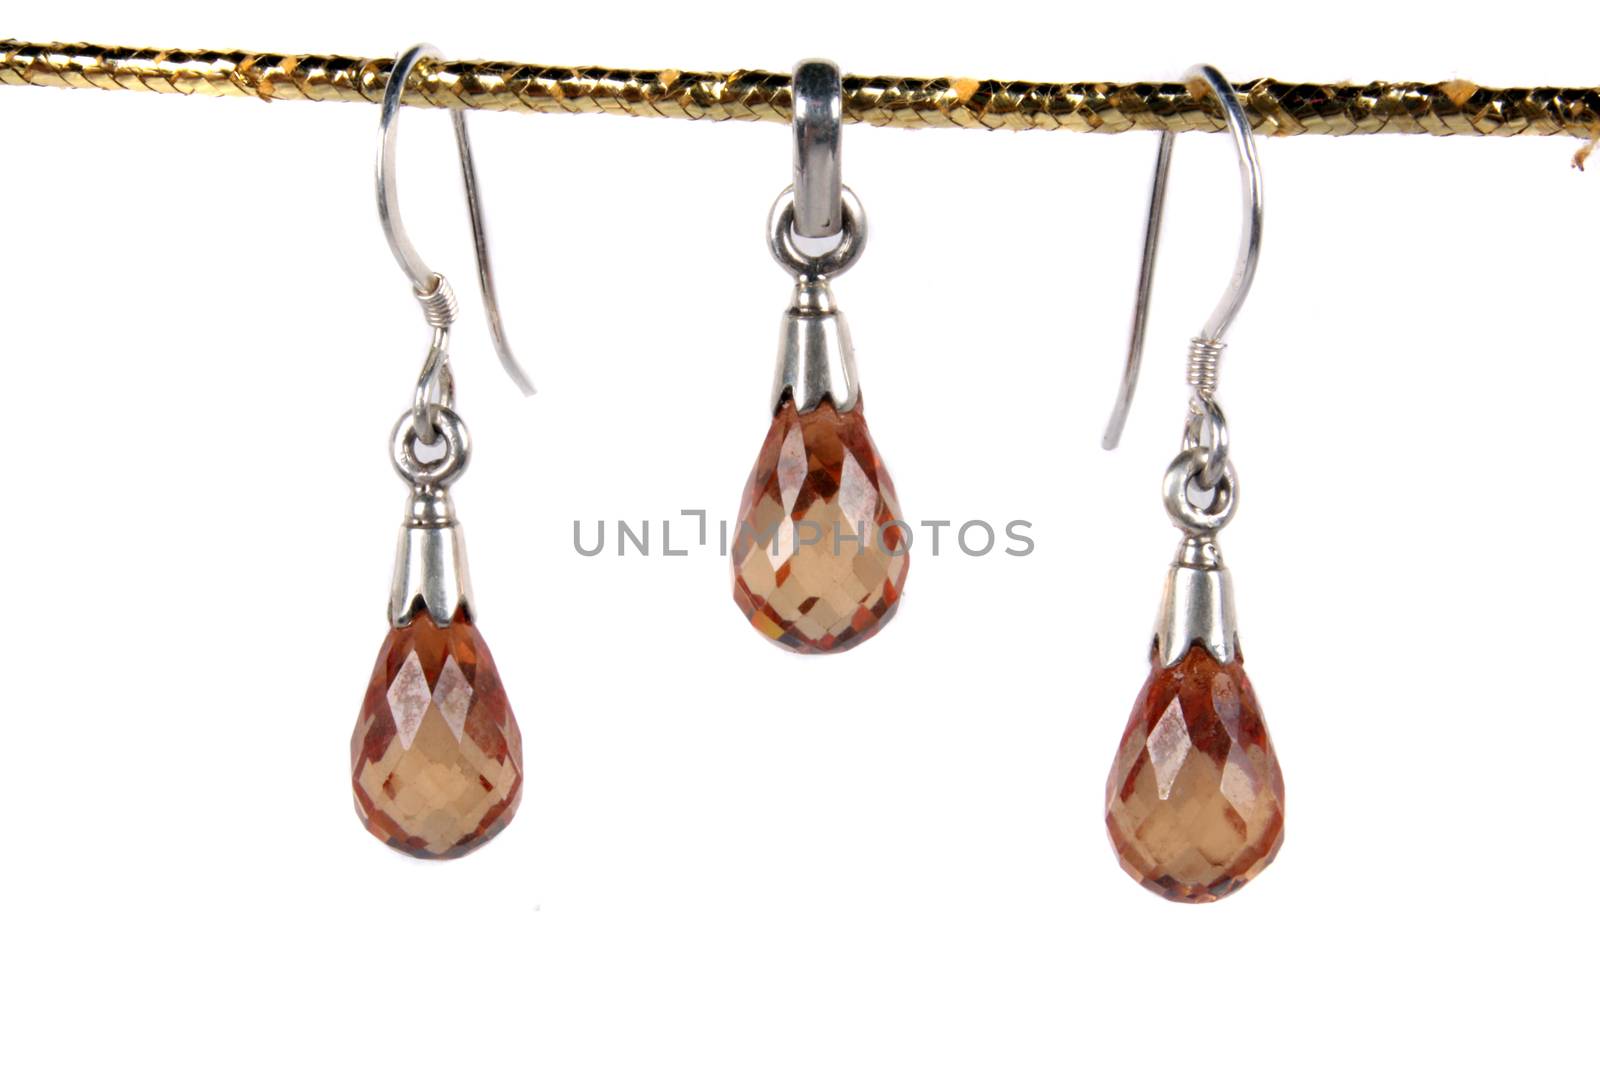 A jewelery set of earrings and pendant made in silver and semi precious gemstones.